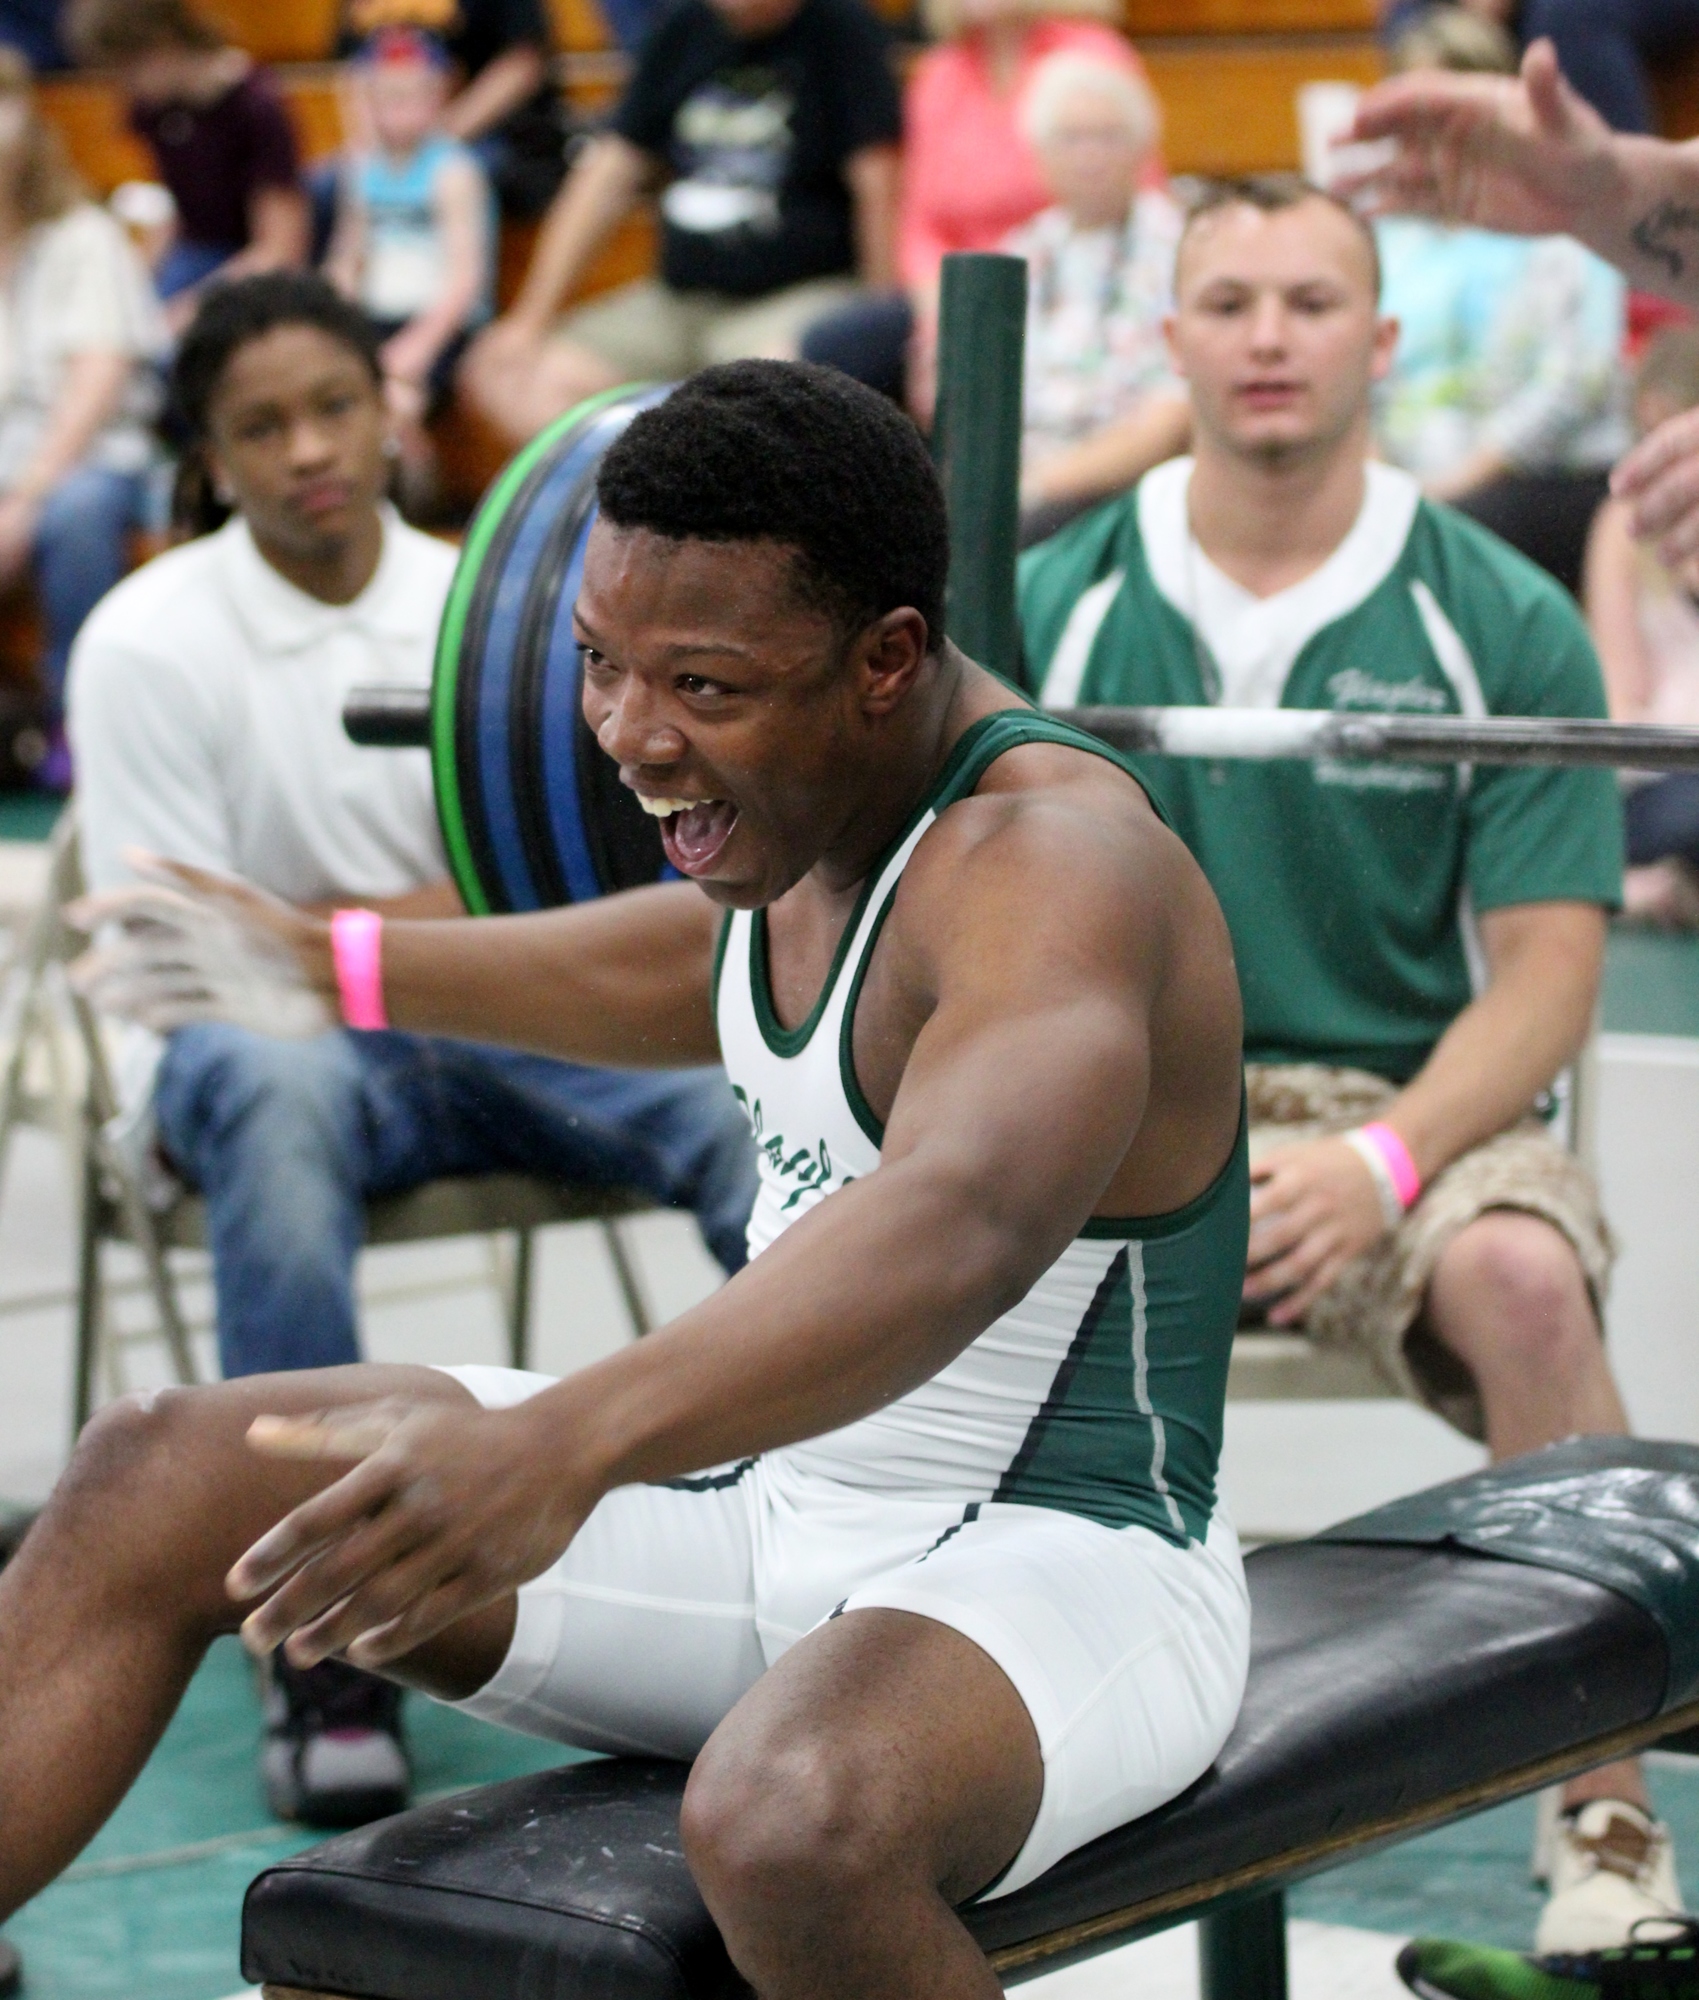 Donte Bell expresses his joy after clearing 300 pounds on the bench. Jeff Dawsey